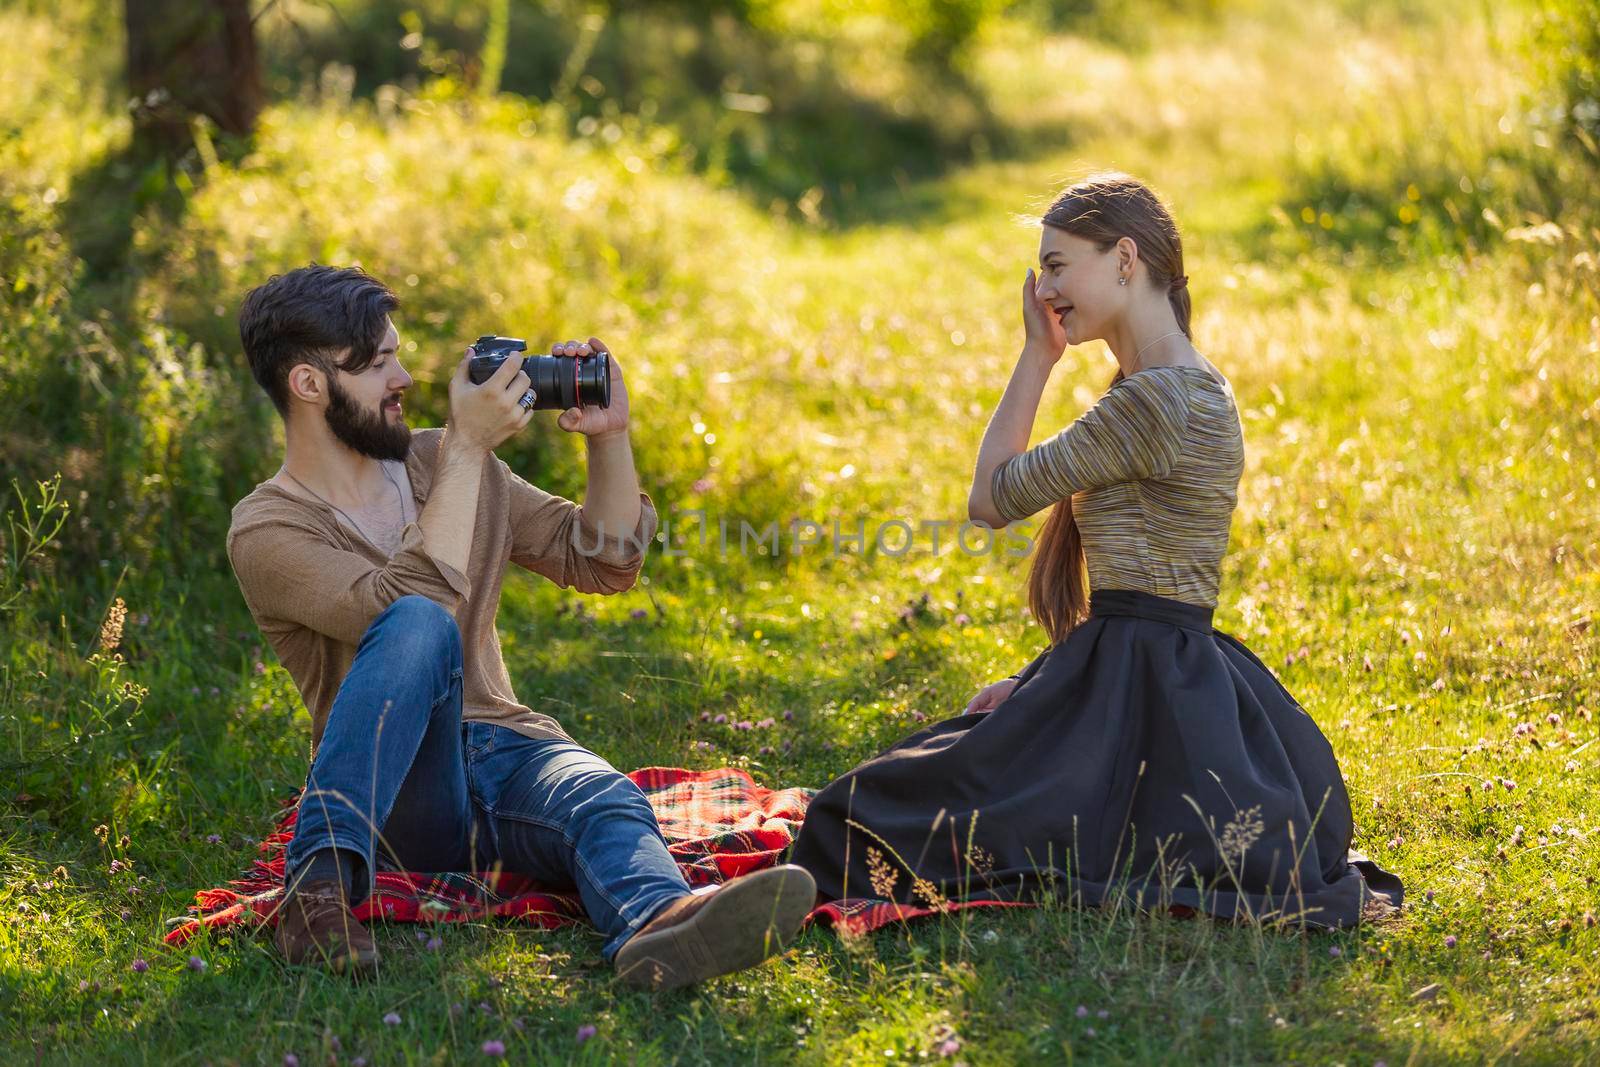 the guy photographs his girlfriend with a camera in a summer park